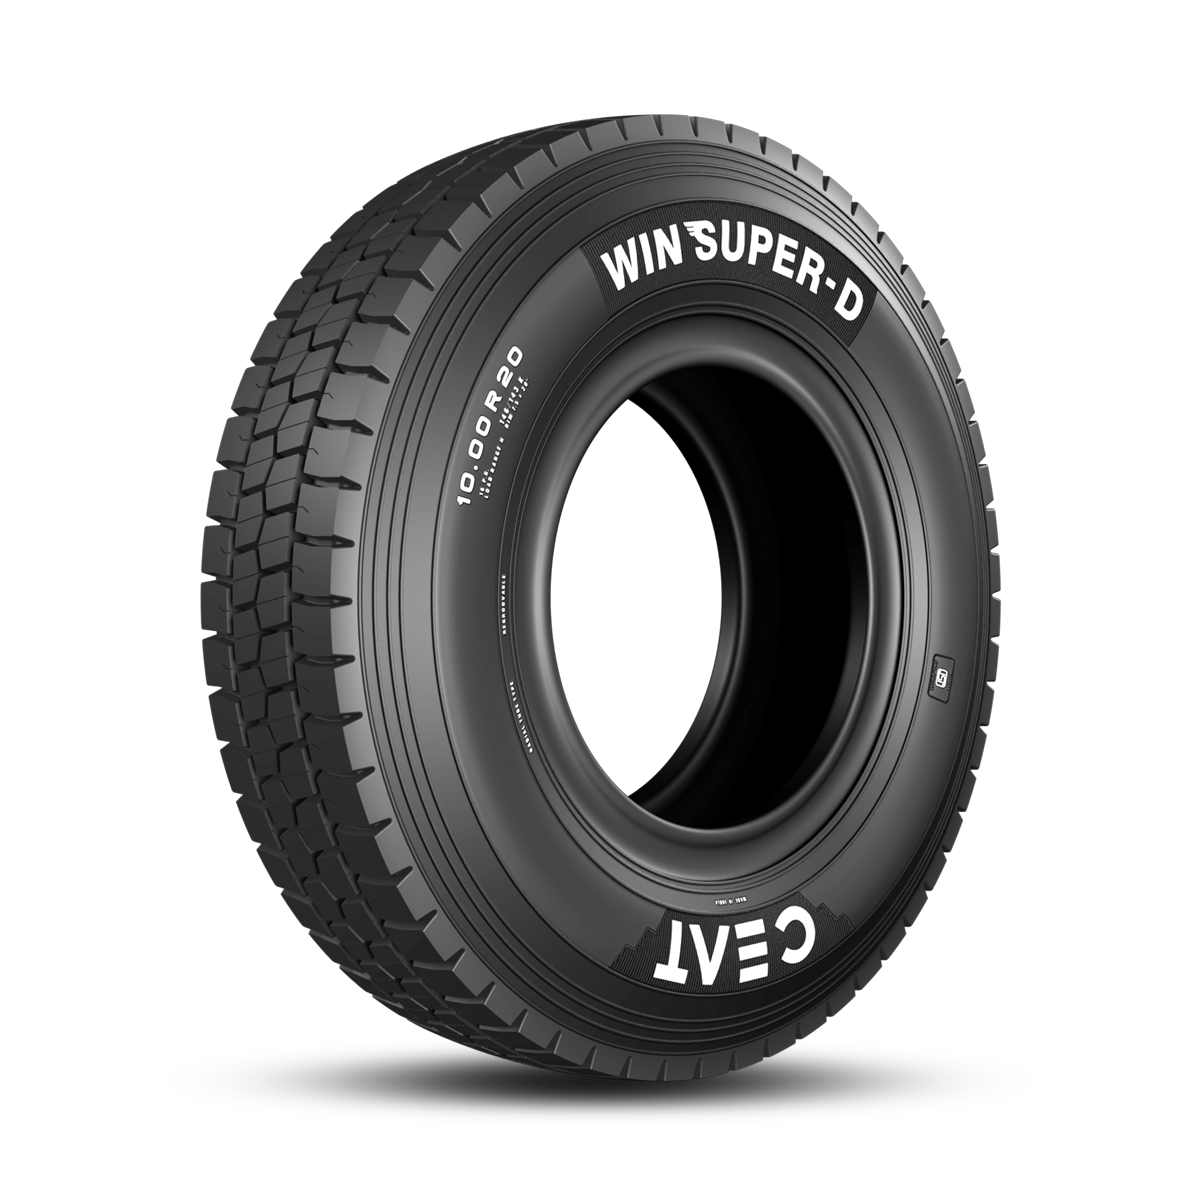 Tire Transparent Isolated Background